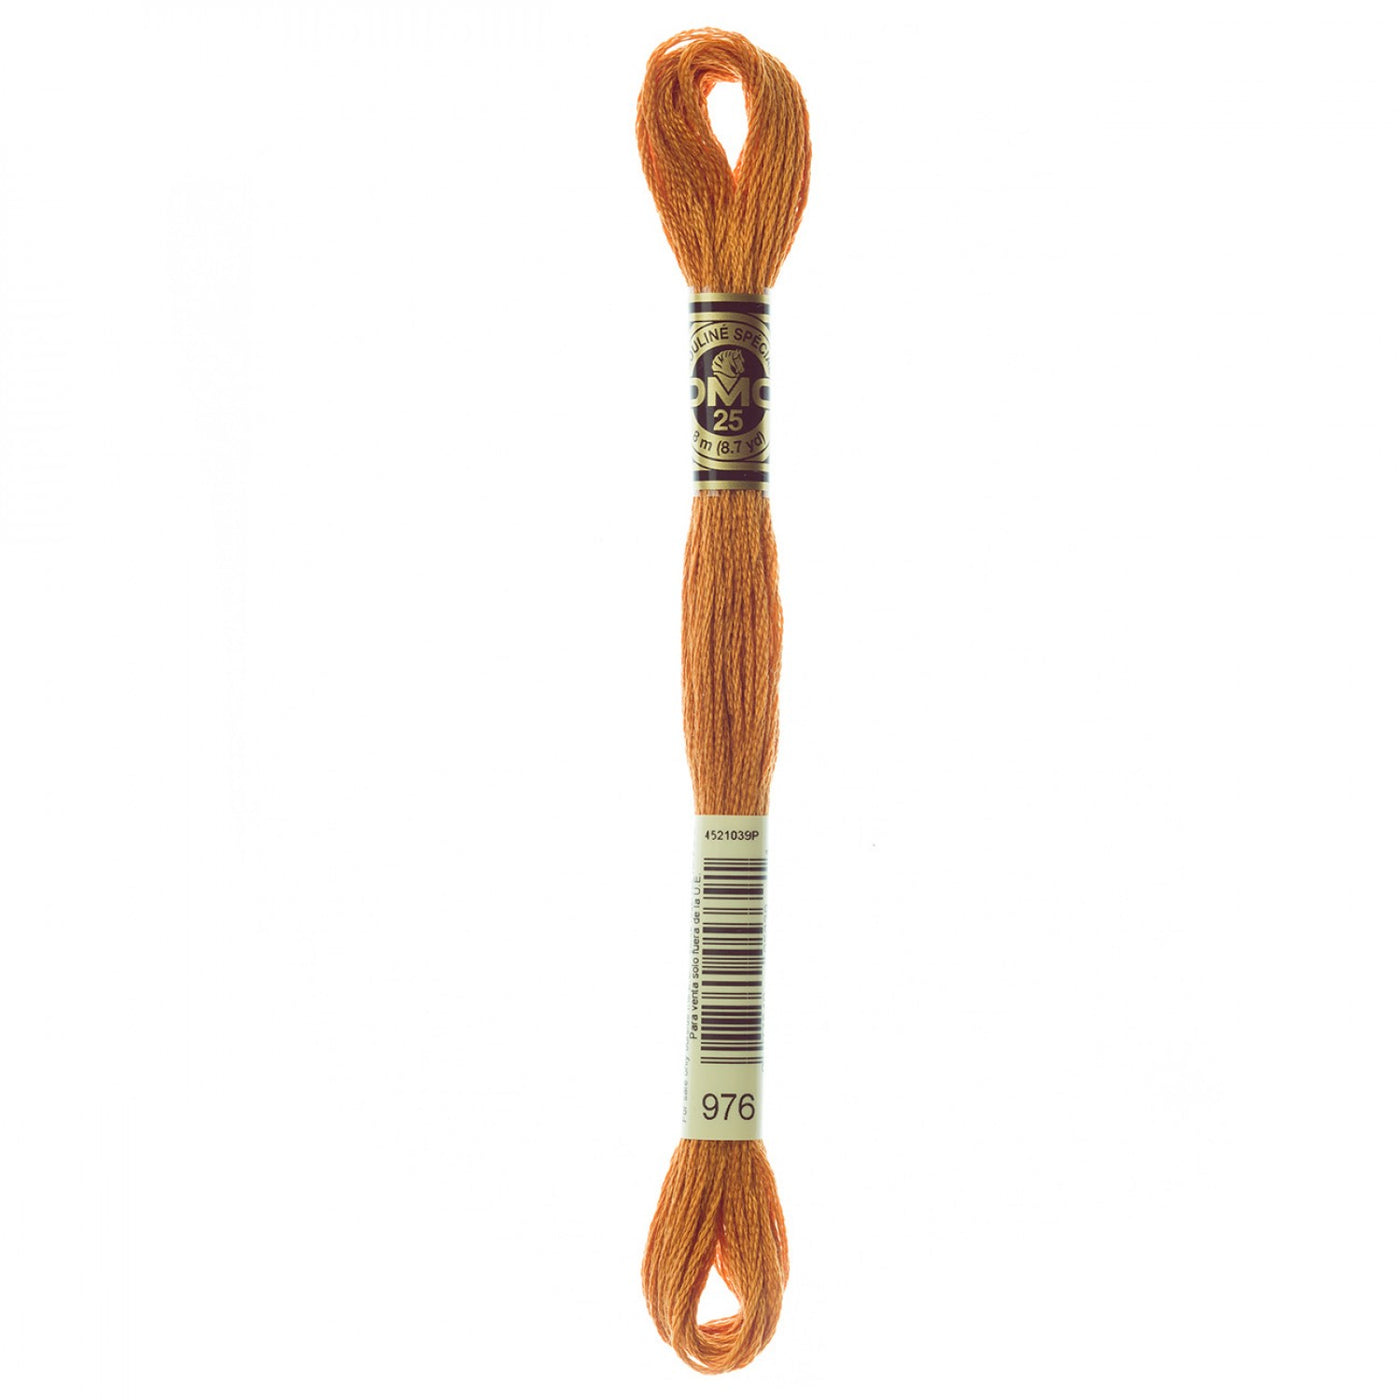 DMC 6-Strand Embroidery Floss 976 Med Gold Brown (5825783824549)